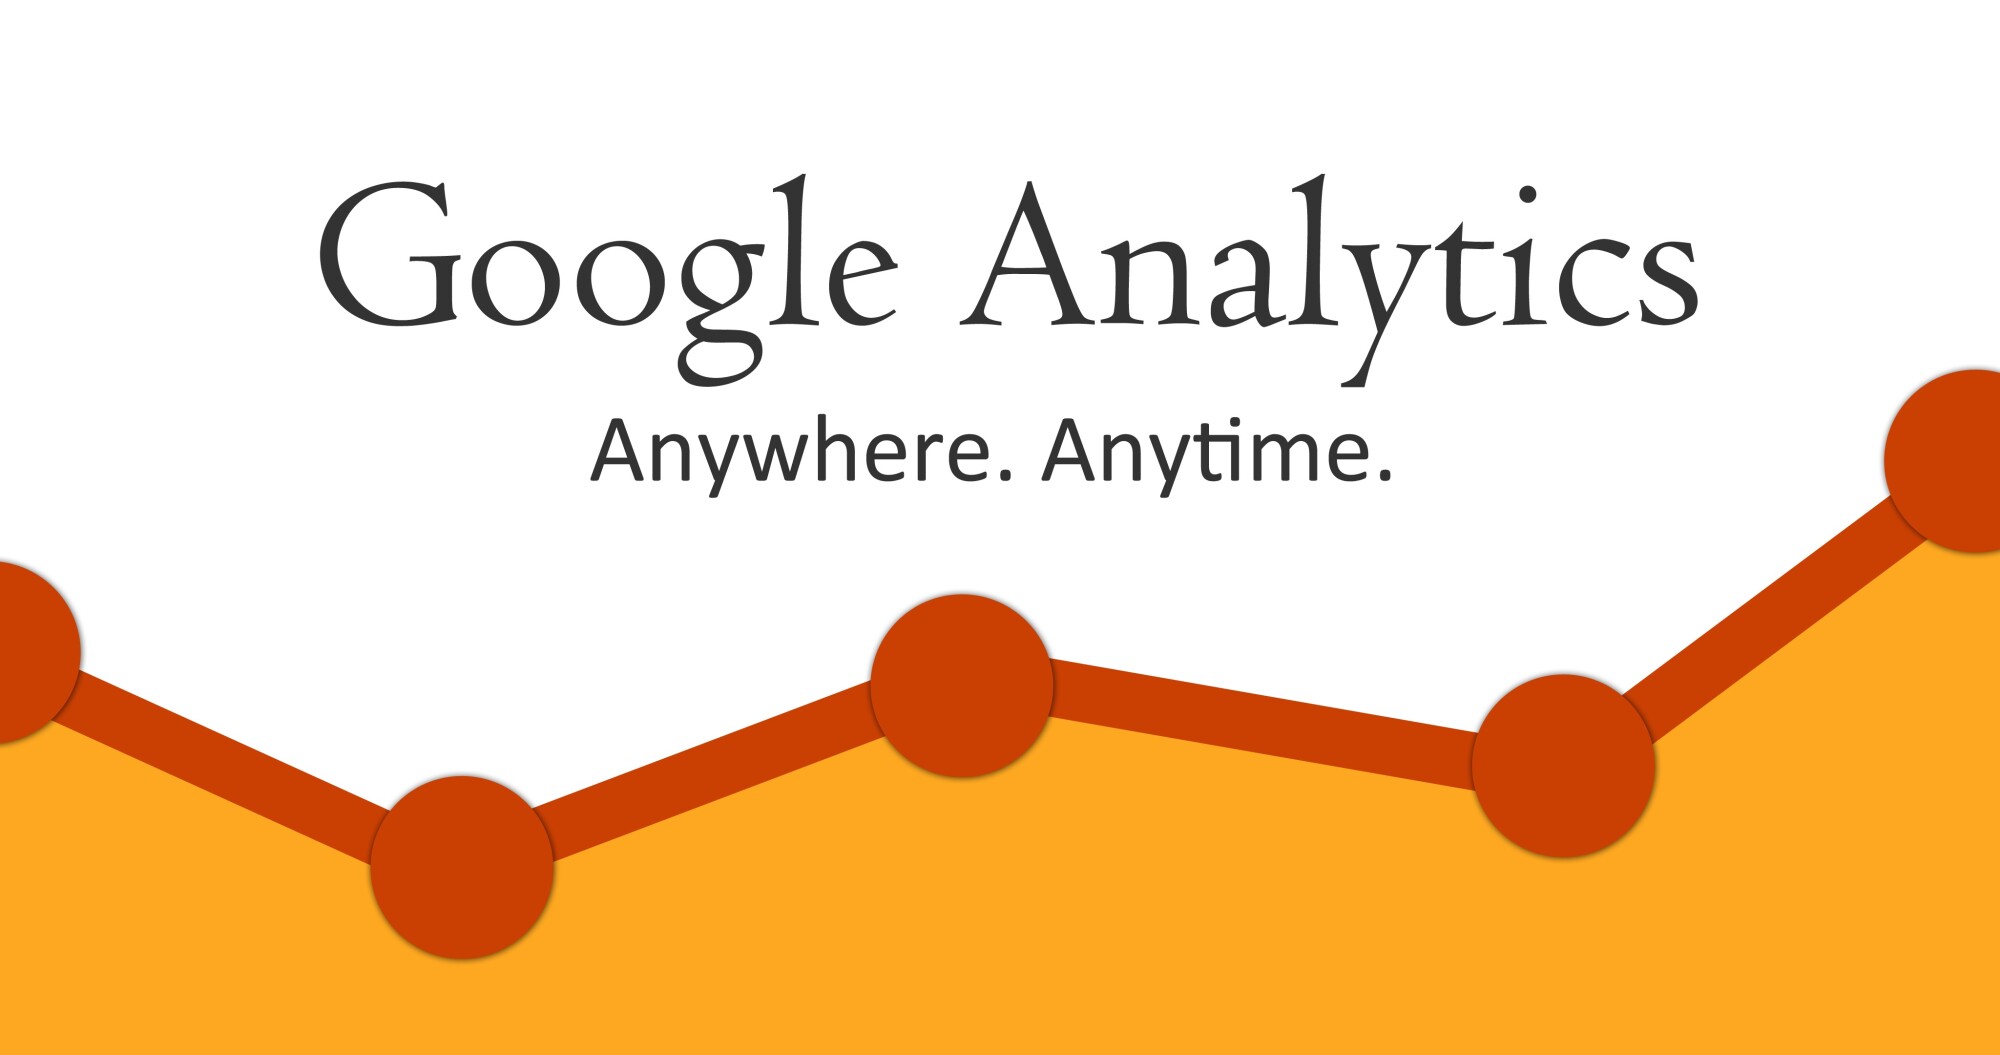 What You Need to Know About the Google Analytics 4 (GA4) Upgrade￼